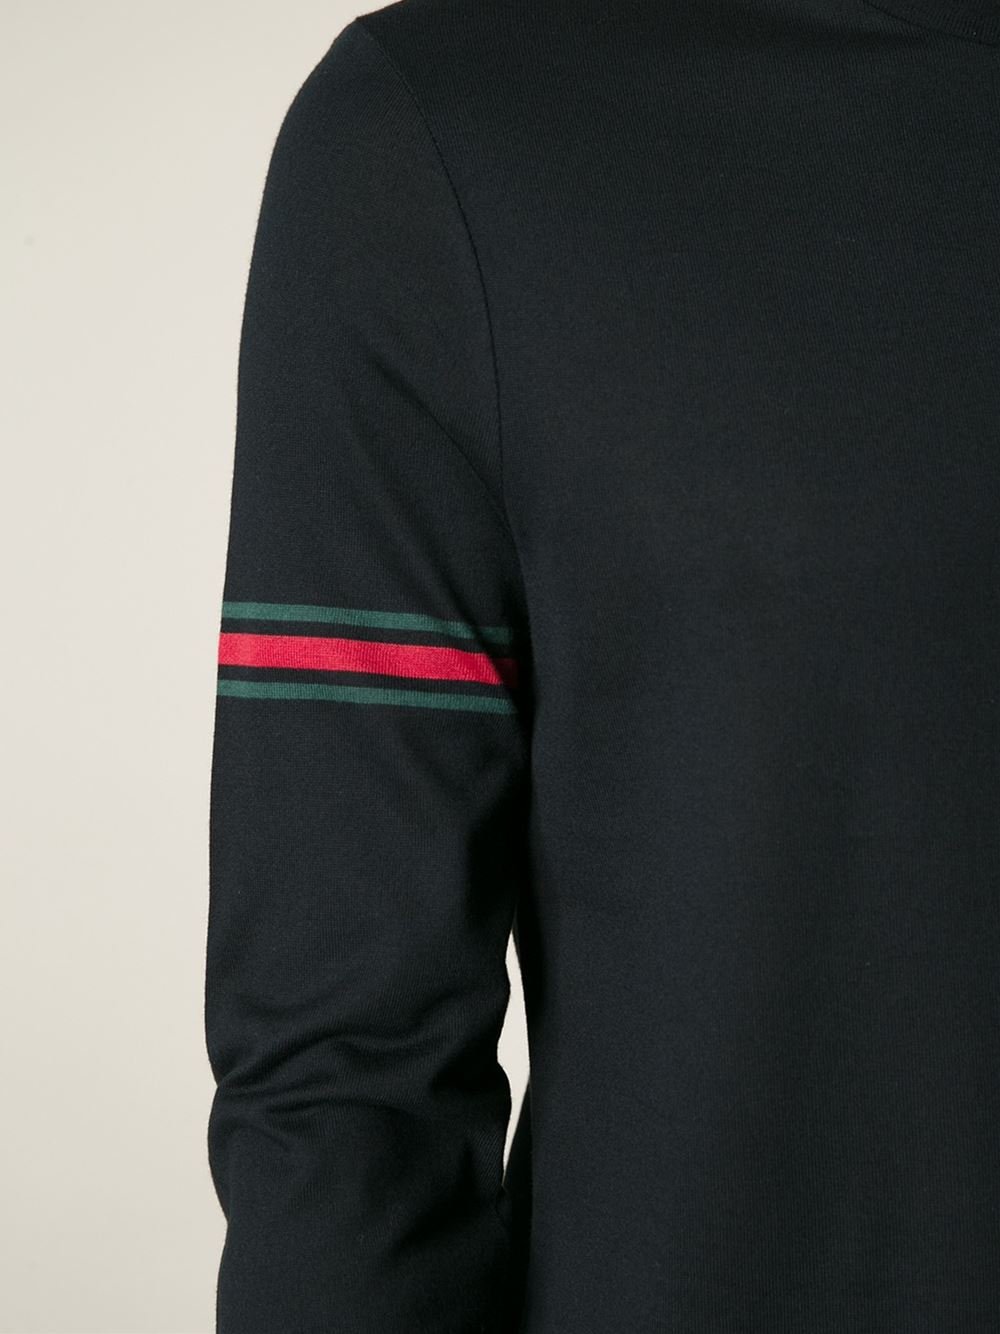 Gucci Long Sleeve T-Shirt in Black for Men | Lyst